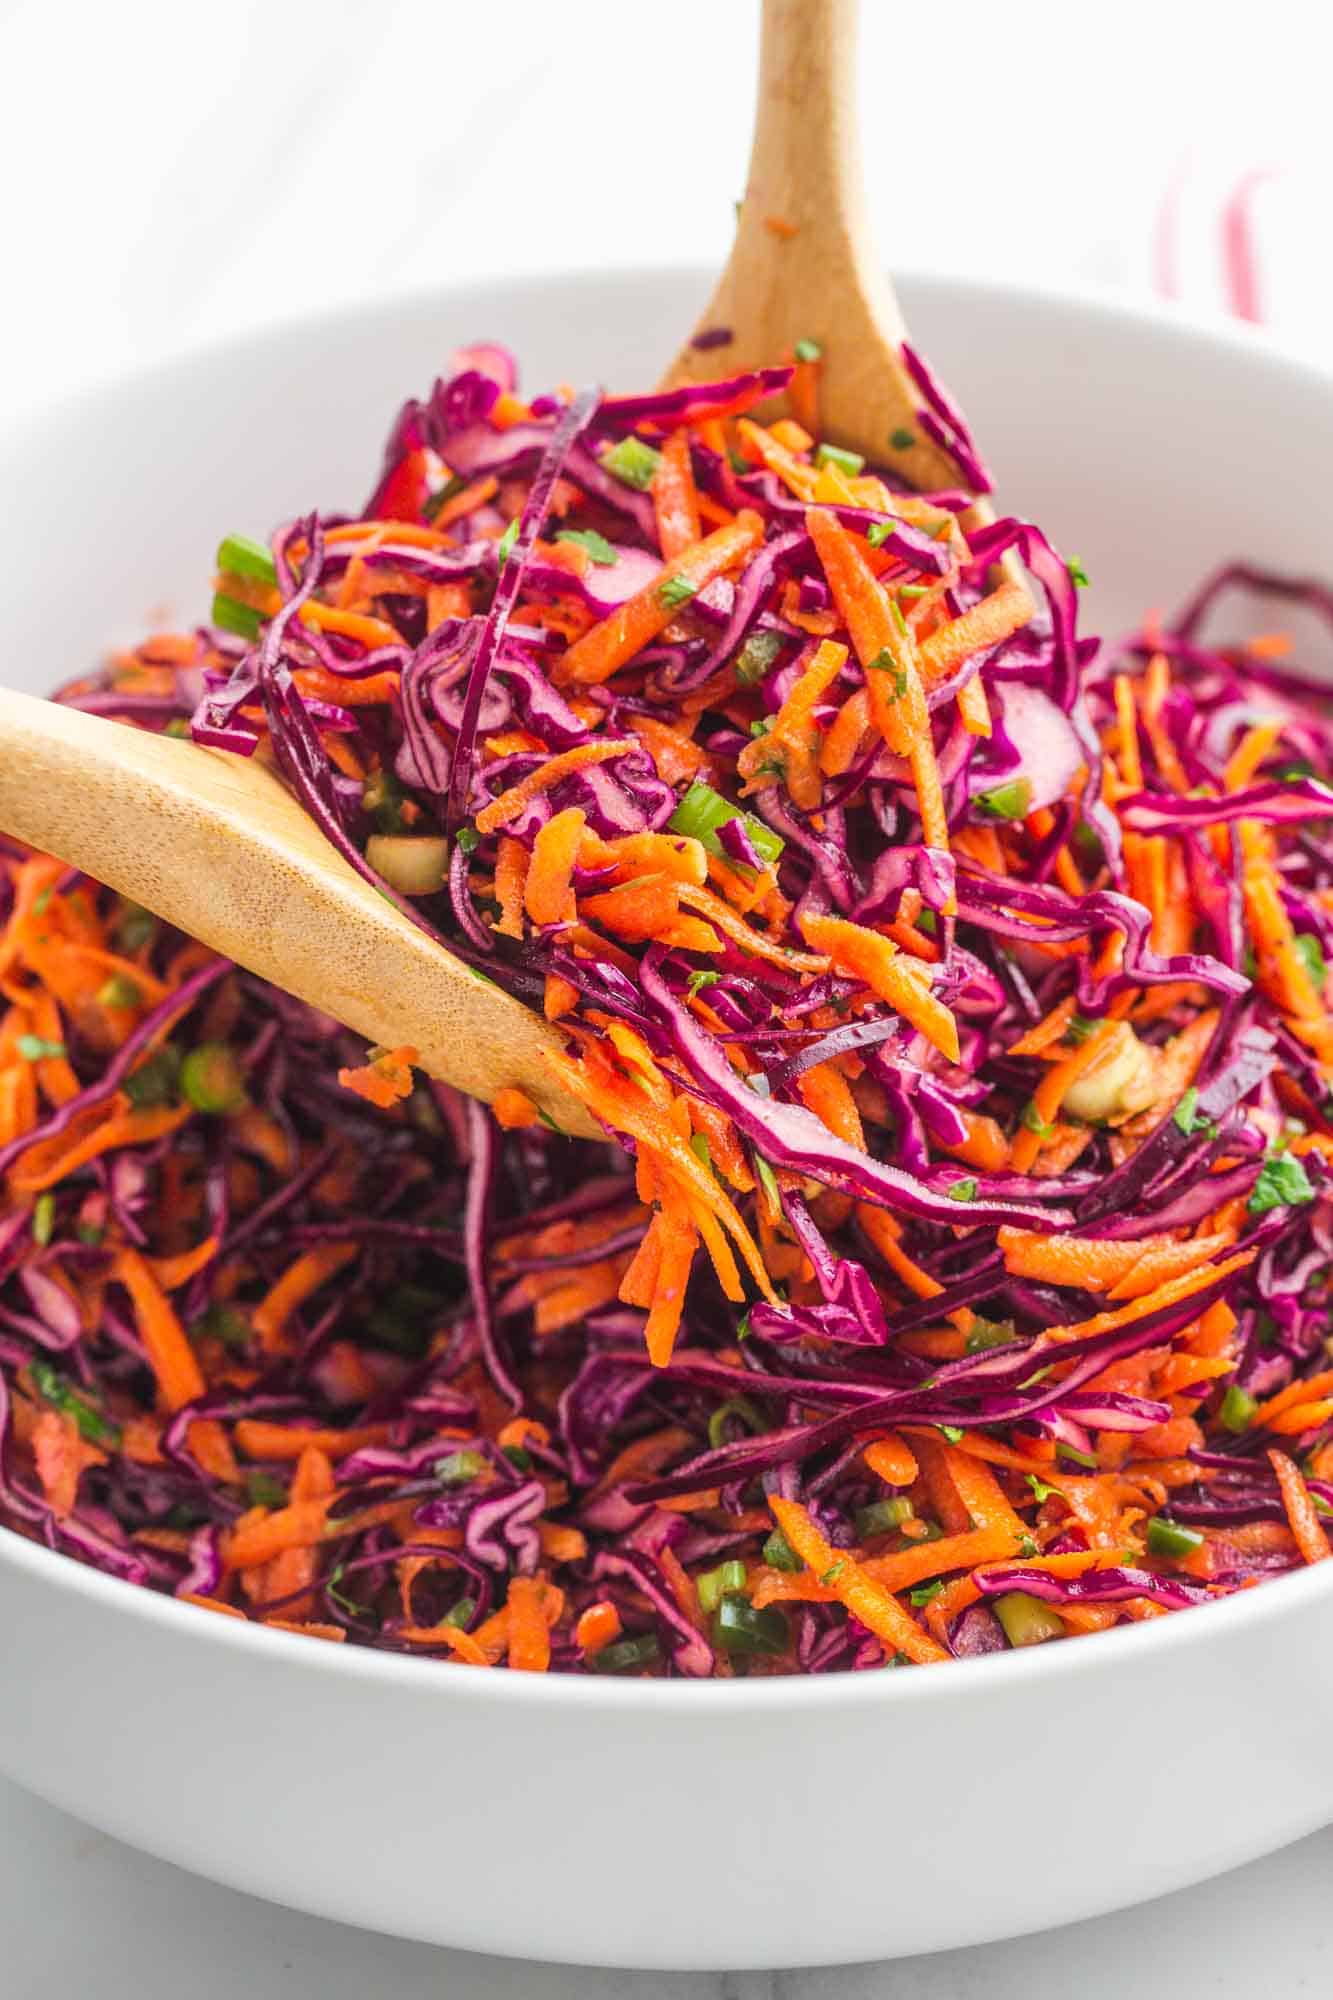 Tossing and serving red cabbage slaw using 2 wooden spoons